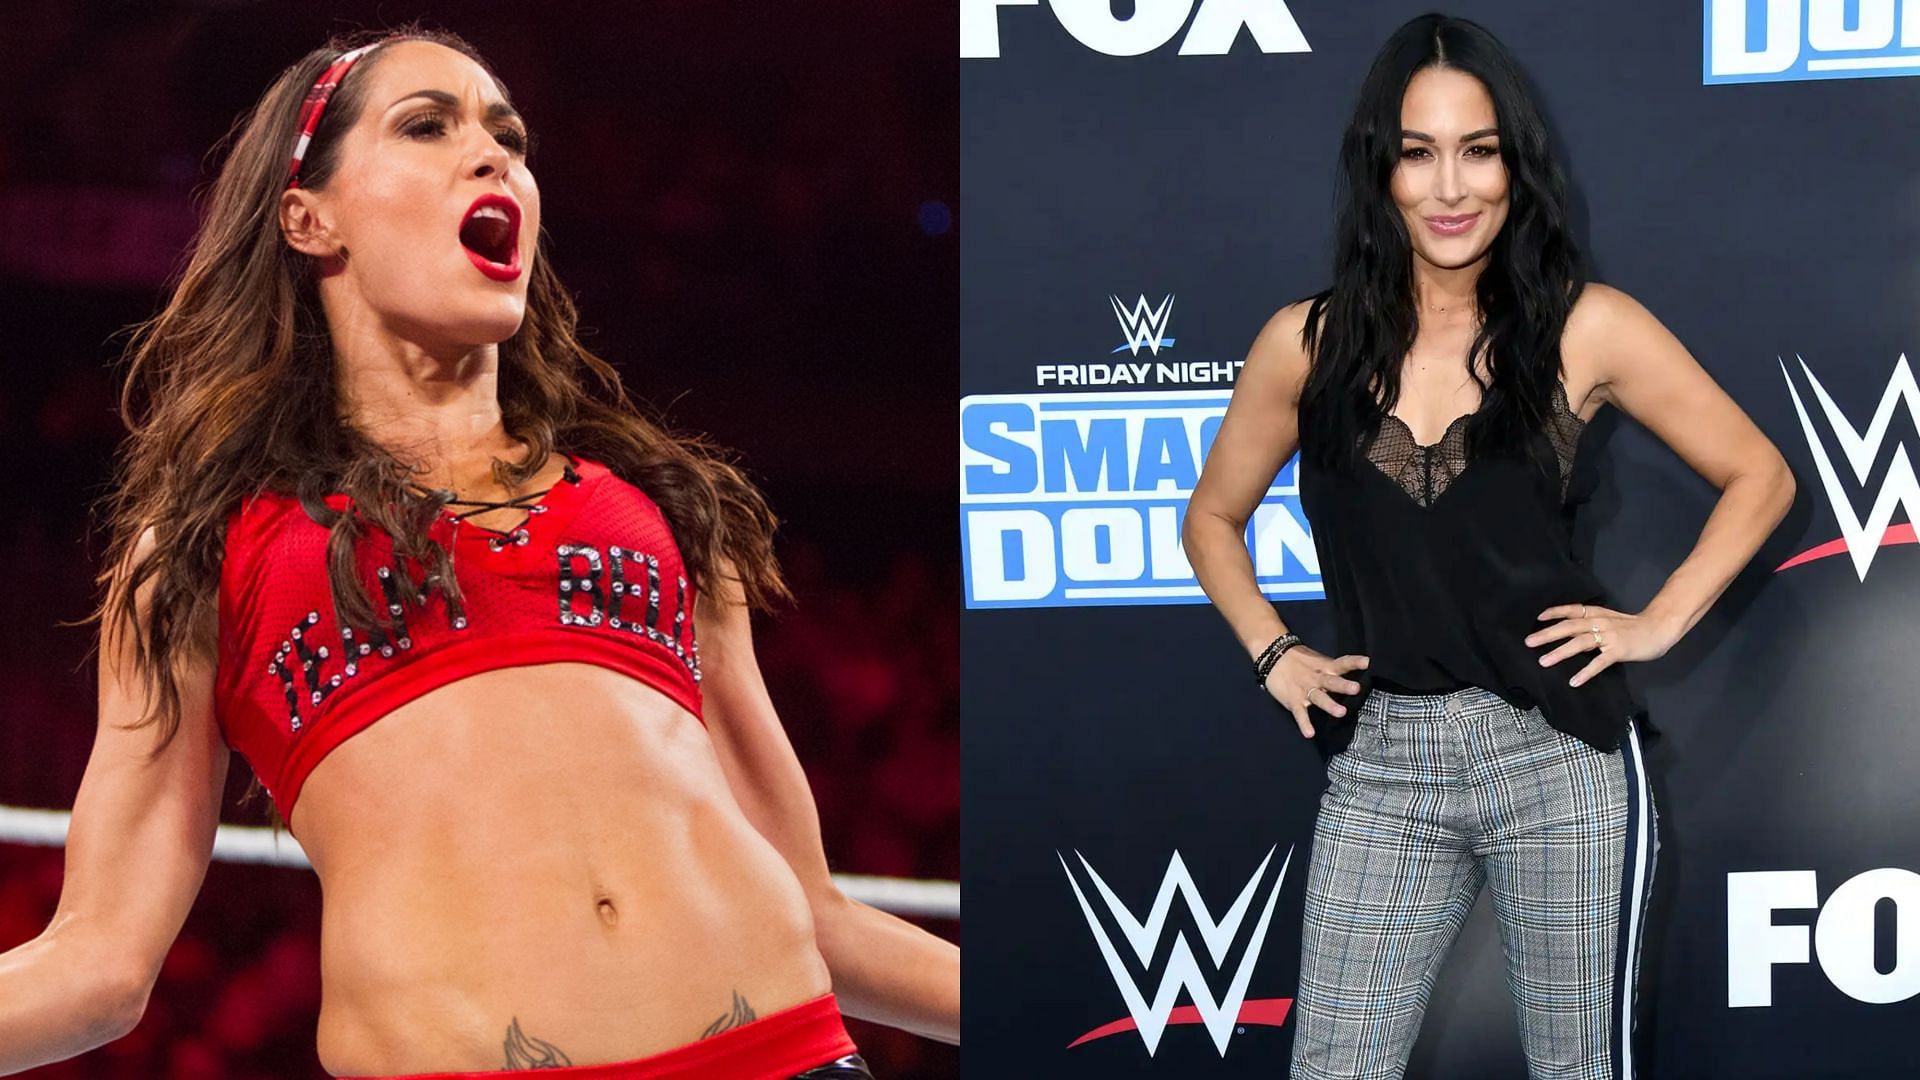 WWE Hall of Famer Brie Bella recently left the company